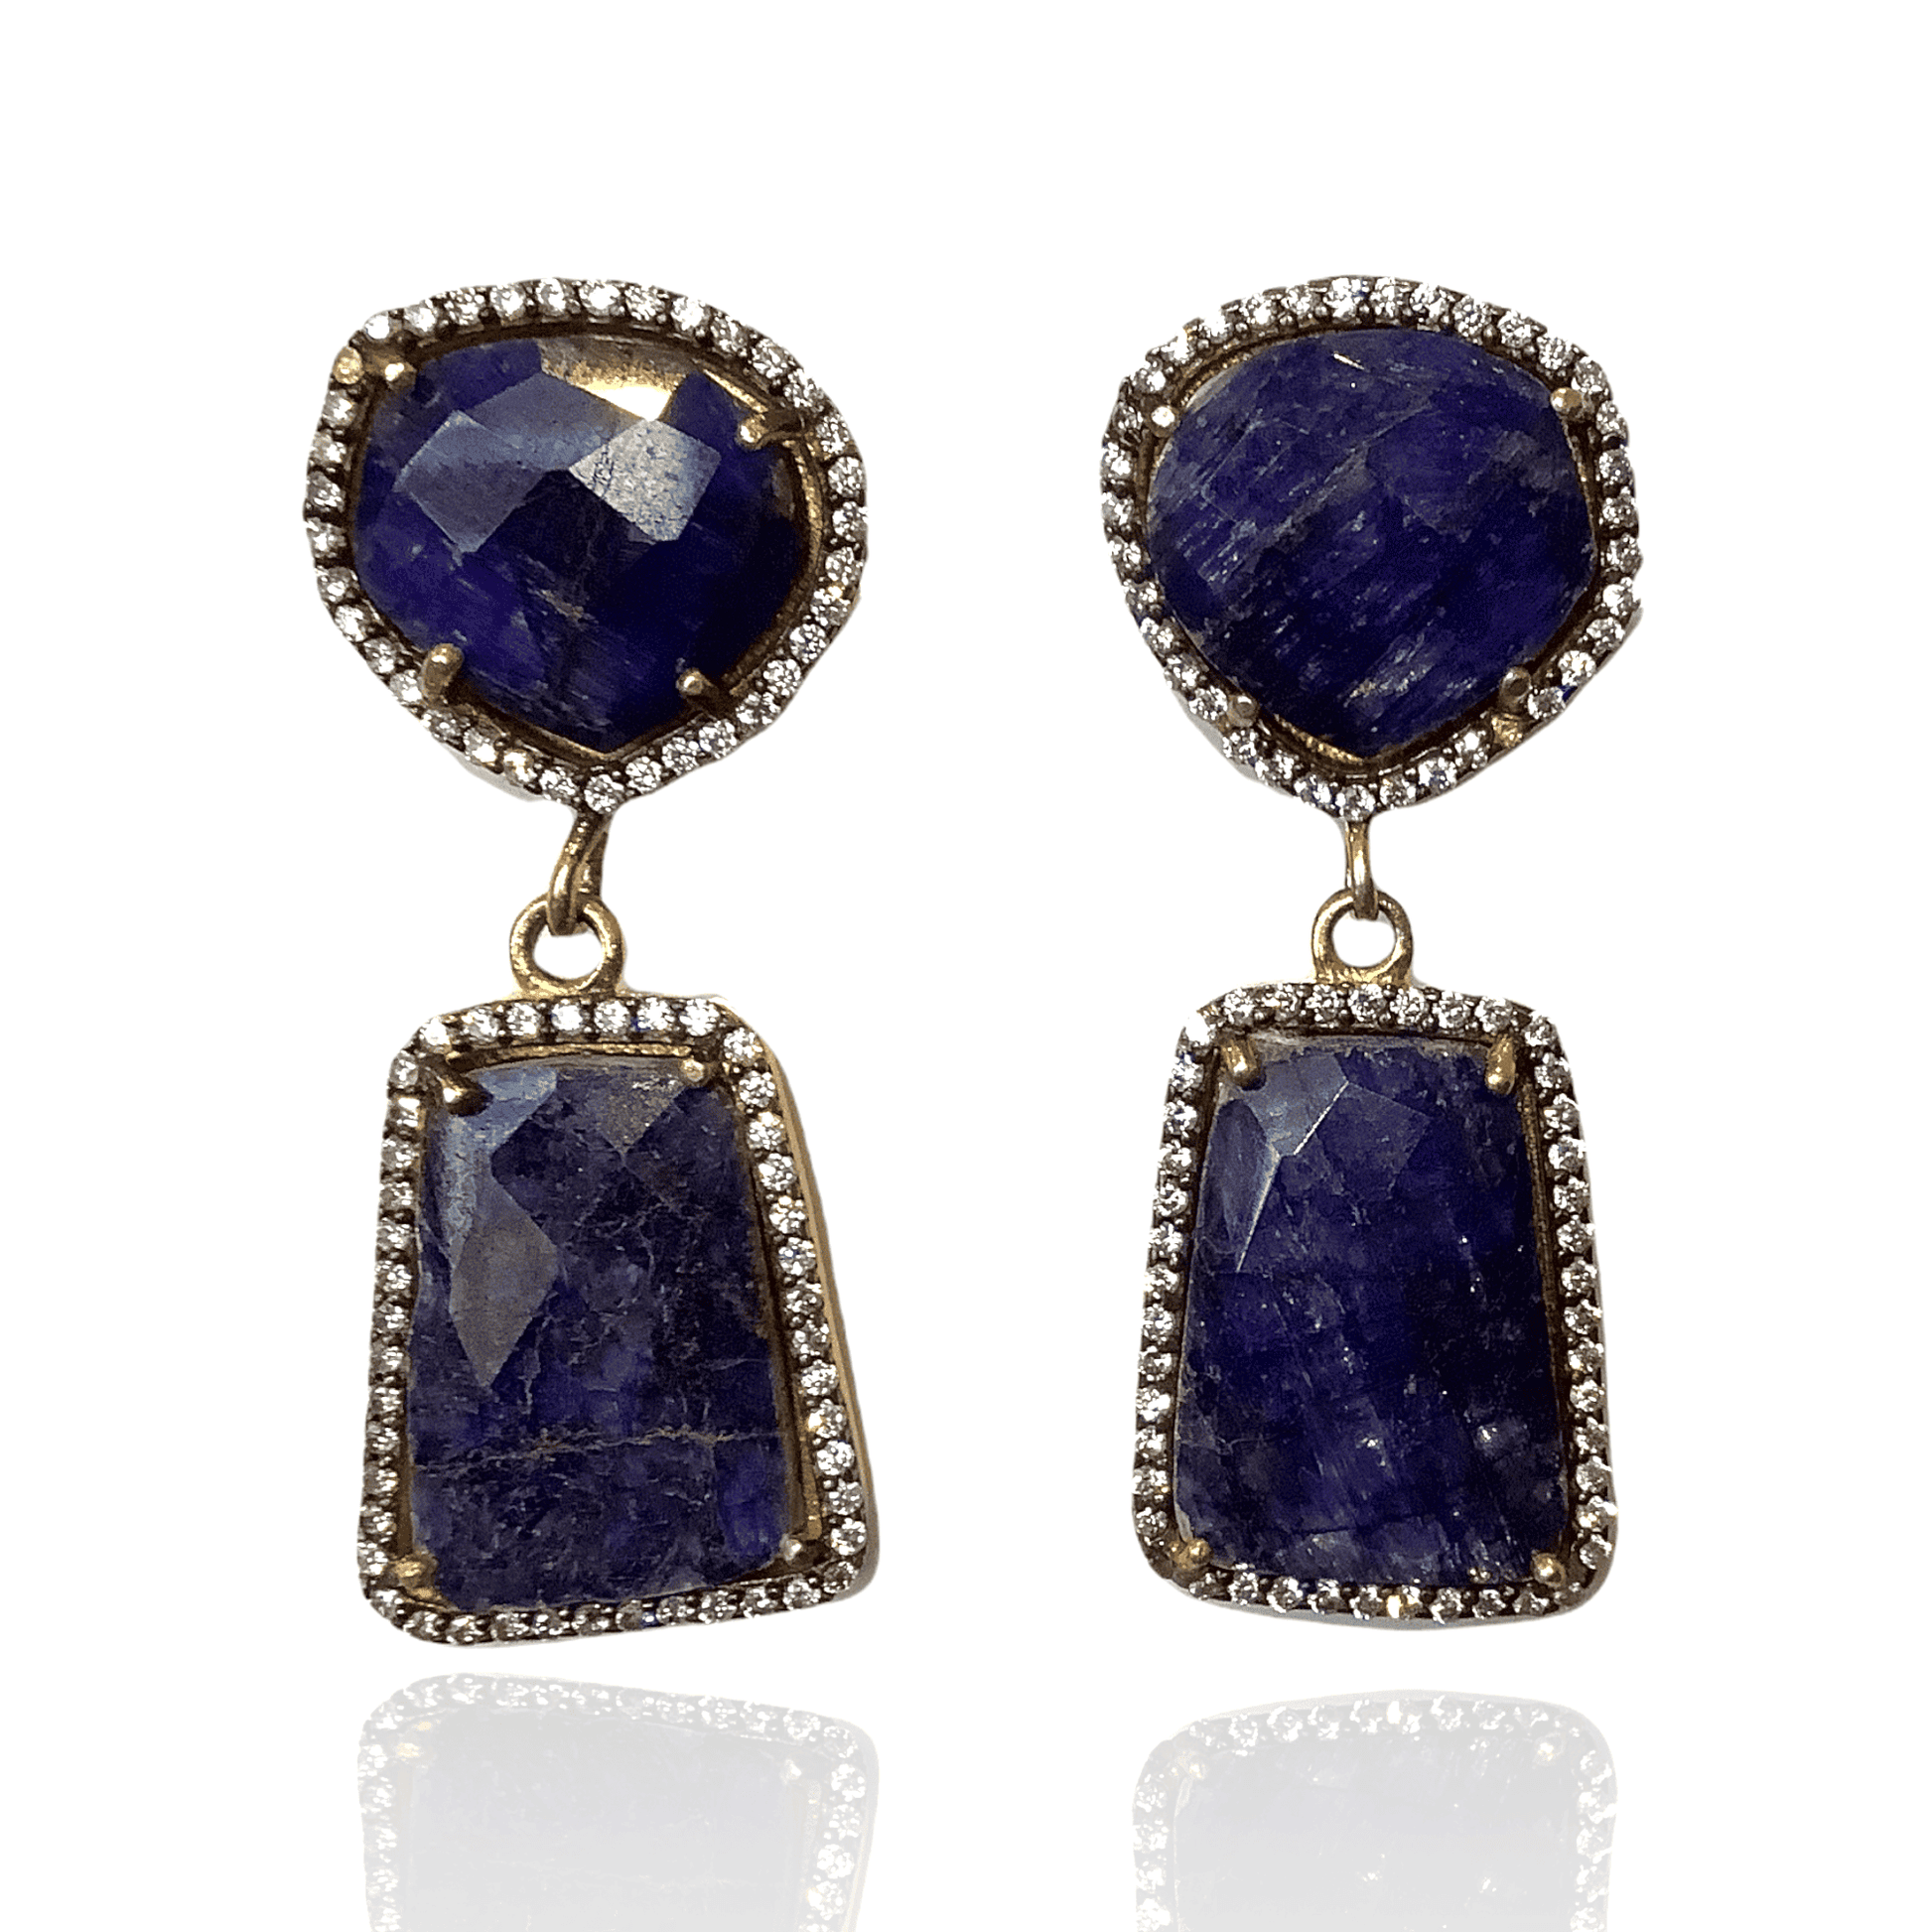 Blue Lapis and Paved CZ Magnificent ADMK Earrings | ADMK, Inc.